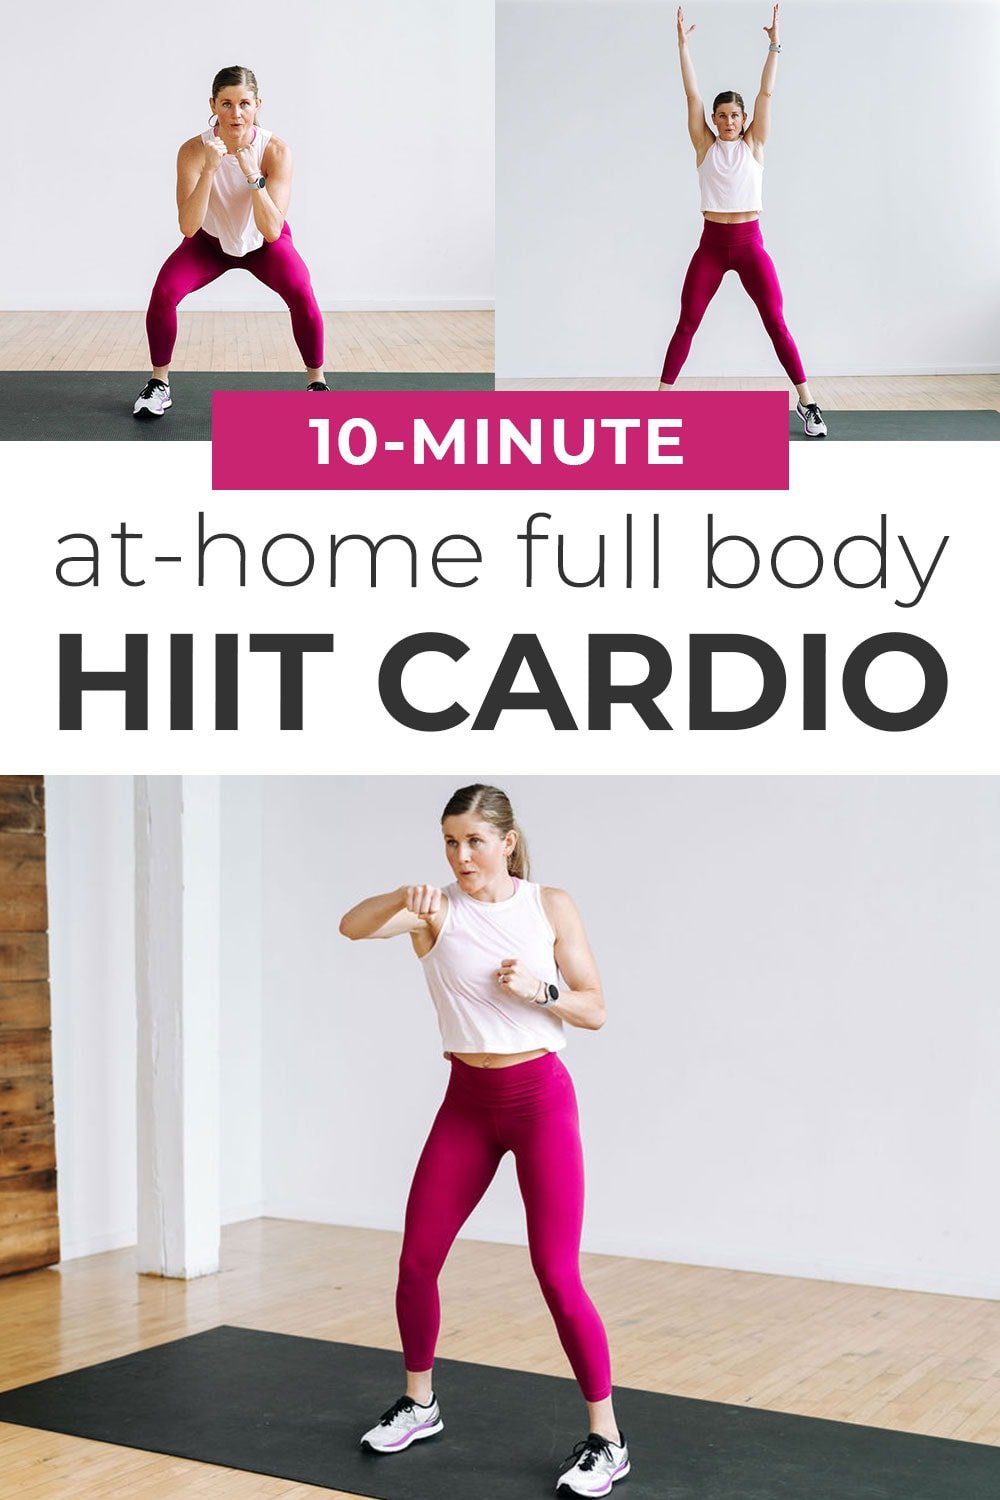  14 Minute Workout Machine for push your ABS